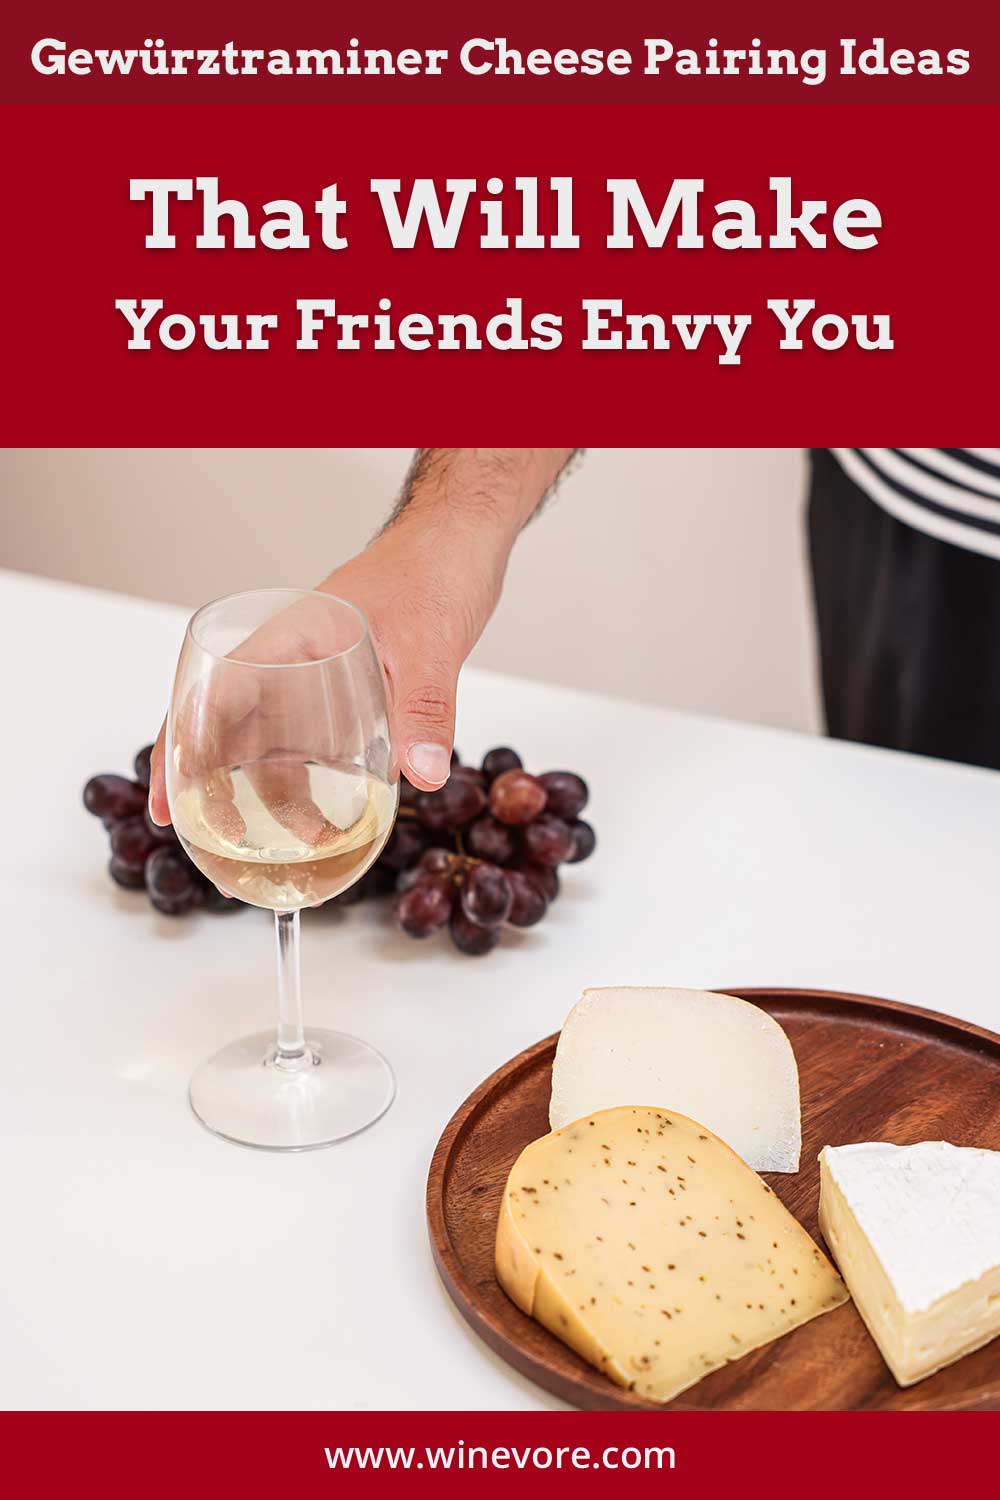 Person's hand grabbing a wine glass from a table with grapes and cheese on it - Gewürztraminer Cheese Pairing Ideas.